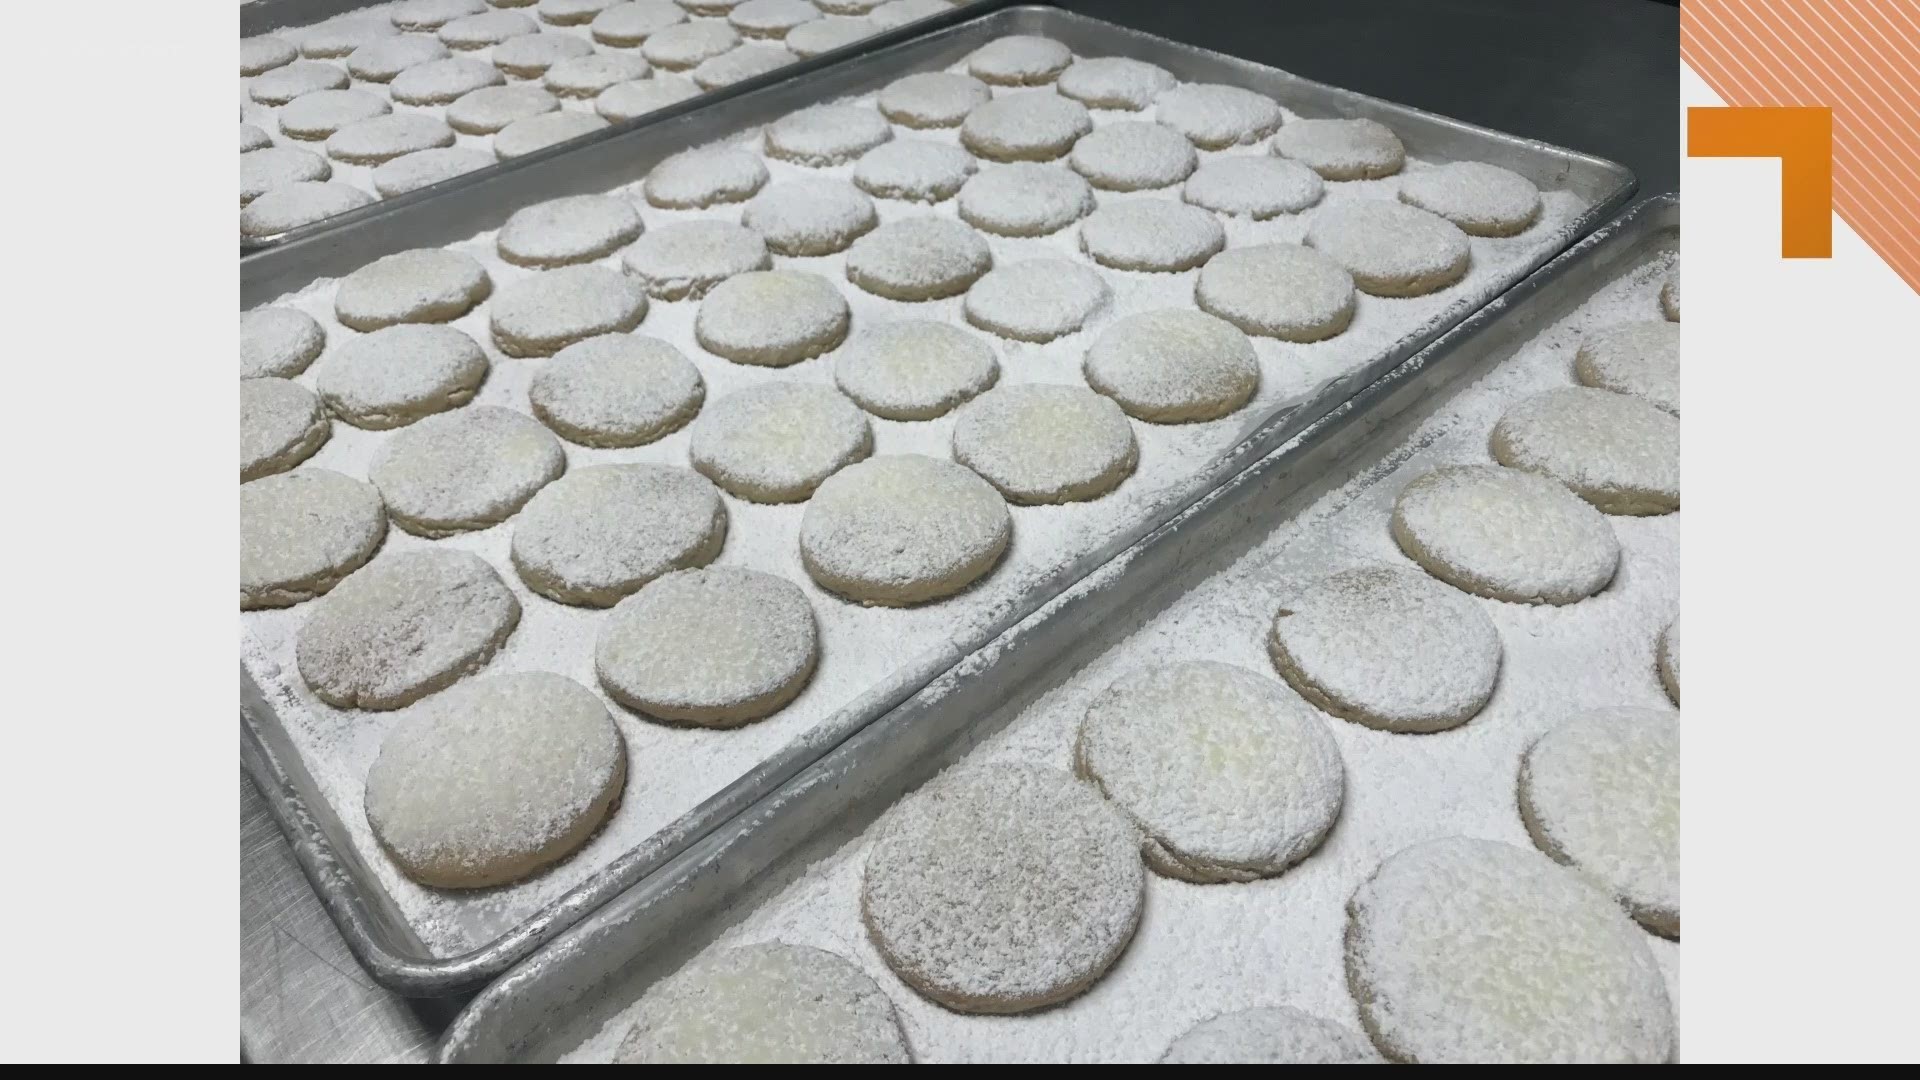 Assumption Greek Orthodox Church shares this popular cookie recipe ahead of the Greek Festival this weekend